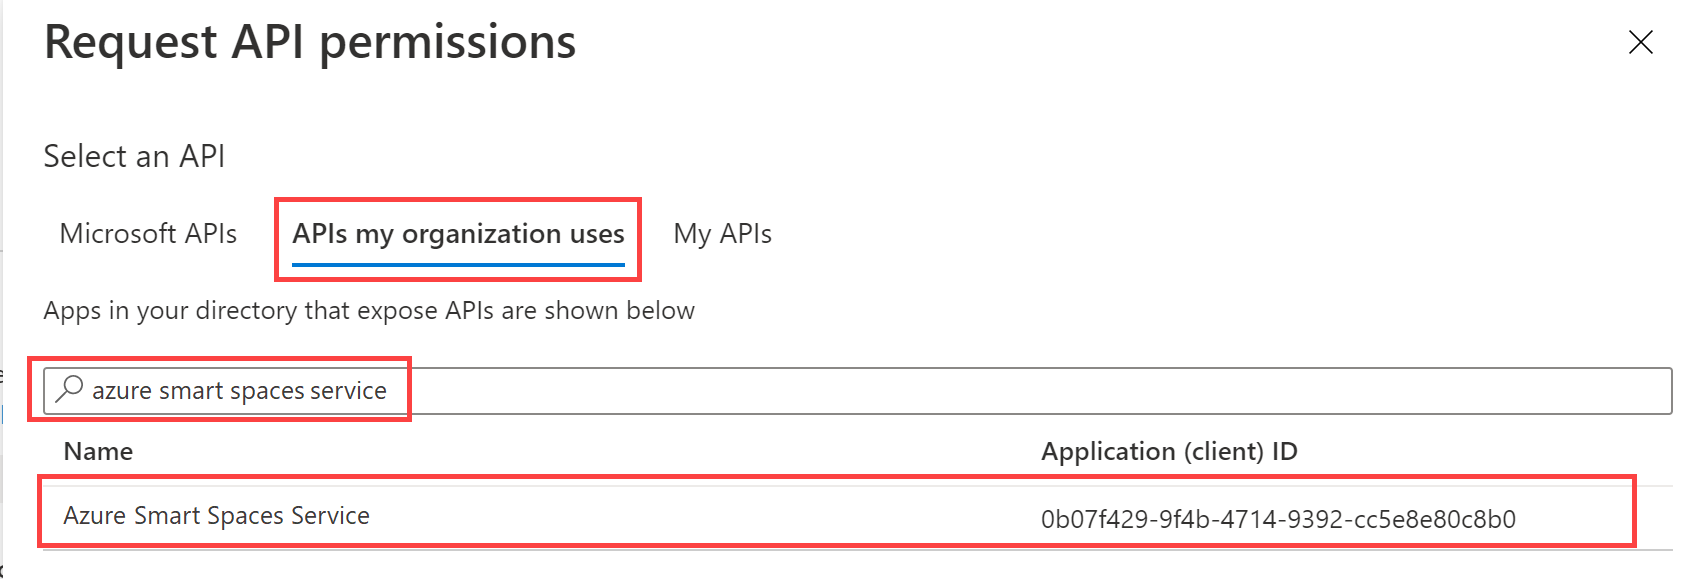 Screenshot of the 'Request API Permissions' page search result showing Azure Smart Spaces Service in the Azure portal.